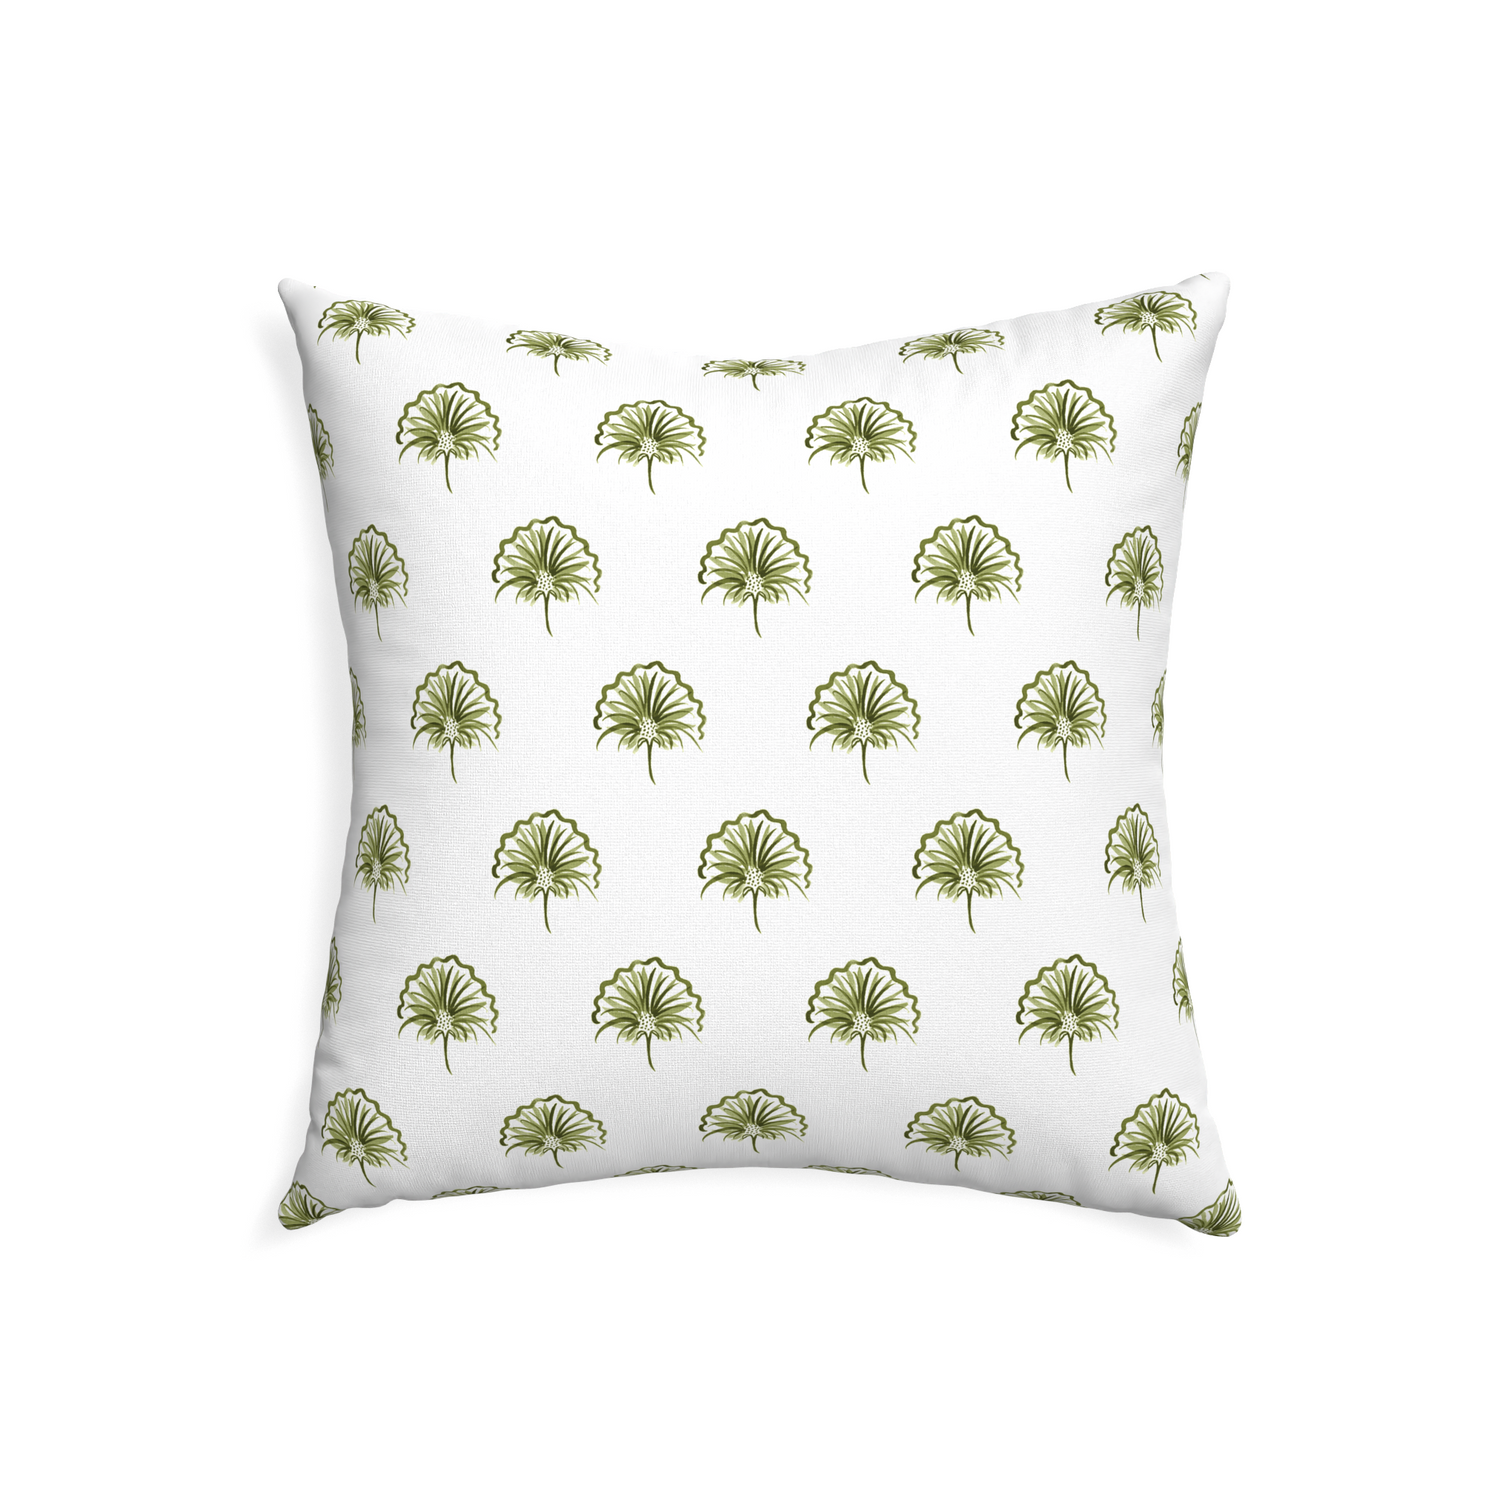 22-square penelope moss custom green floralpillow with none on white background